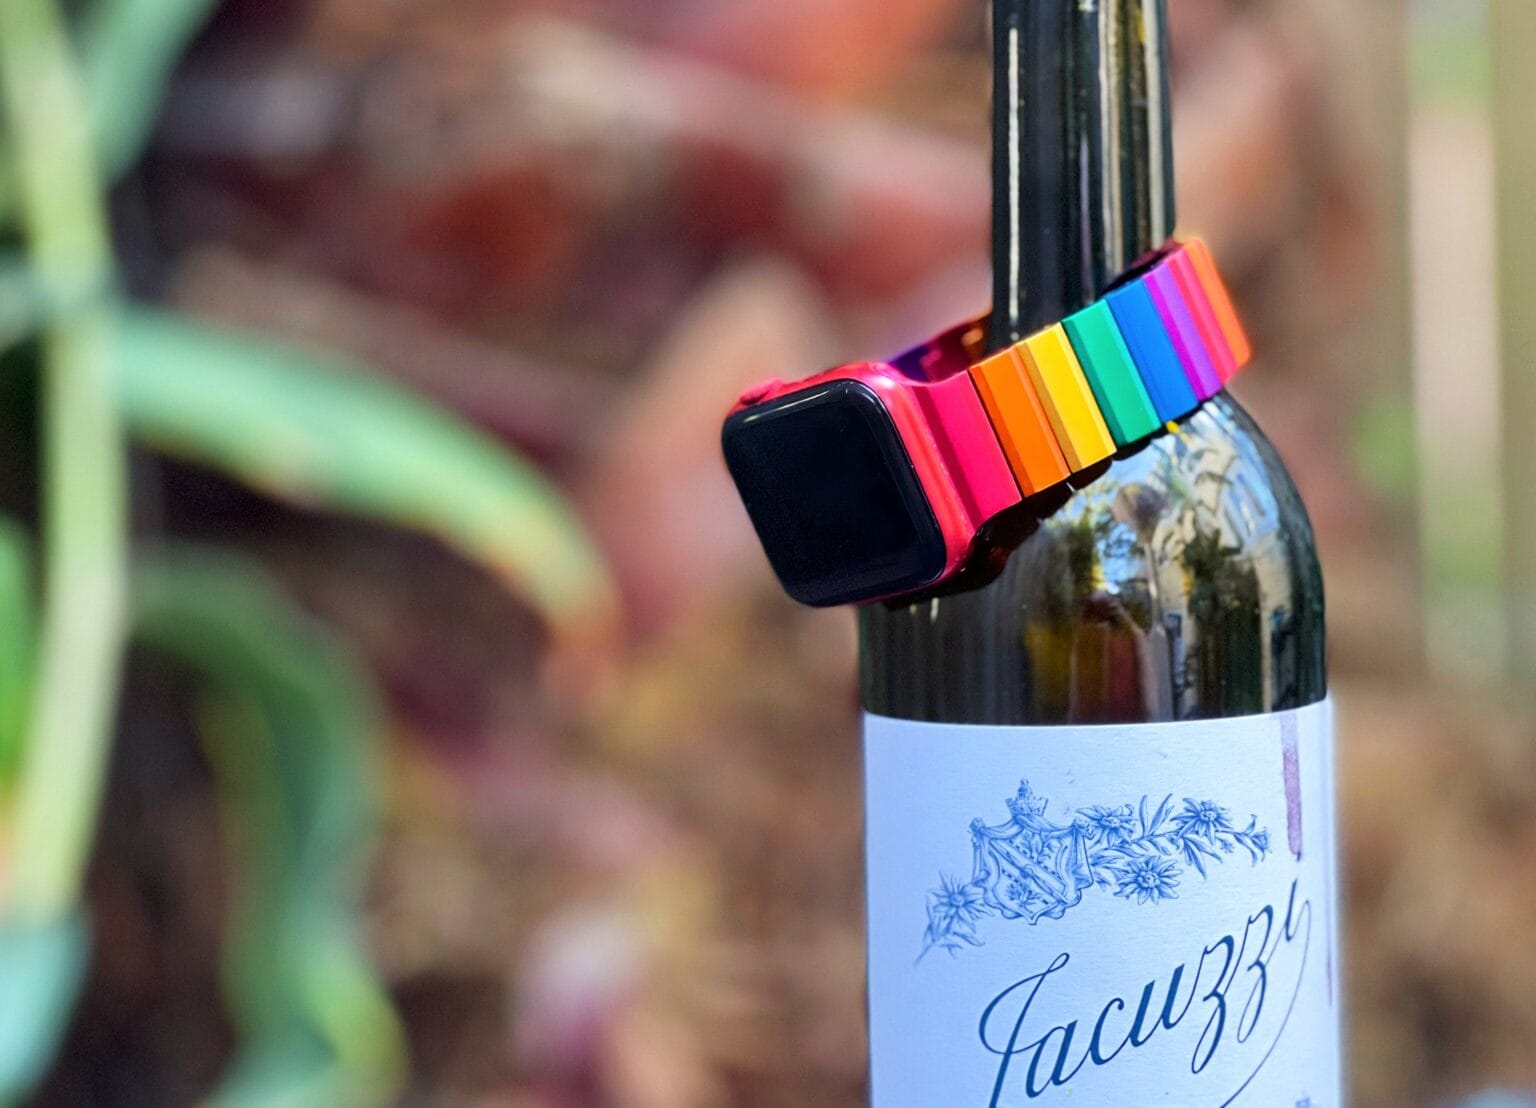 Juuk Ligero Rainbow Apple Watch band review: The colors on this aluminum Apple Watch band will take your breath away.